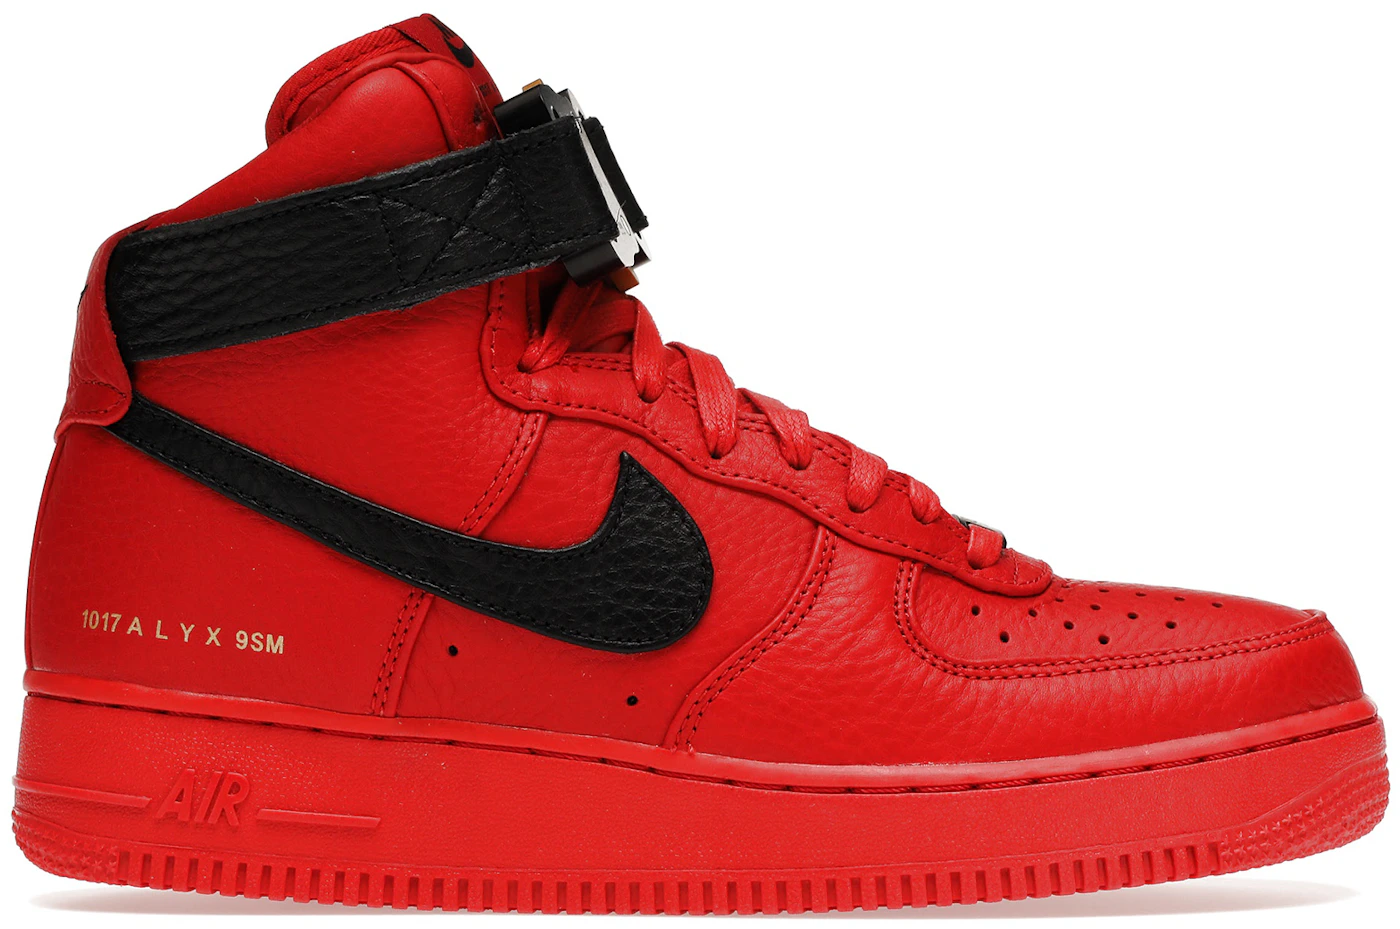 Nike 1017 ALYX 9SM Air Force 1 High University Red